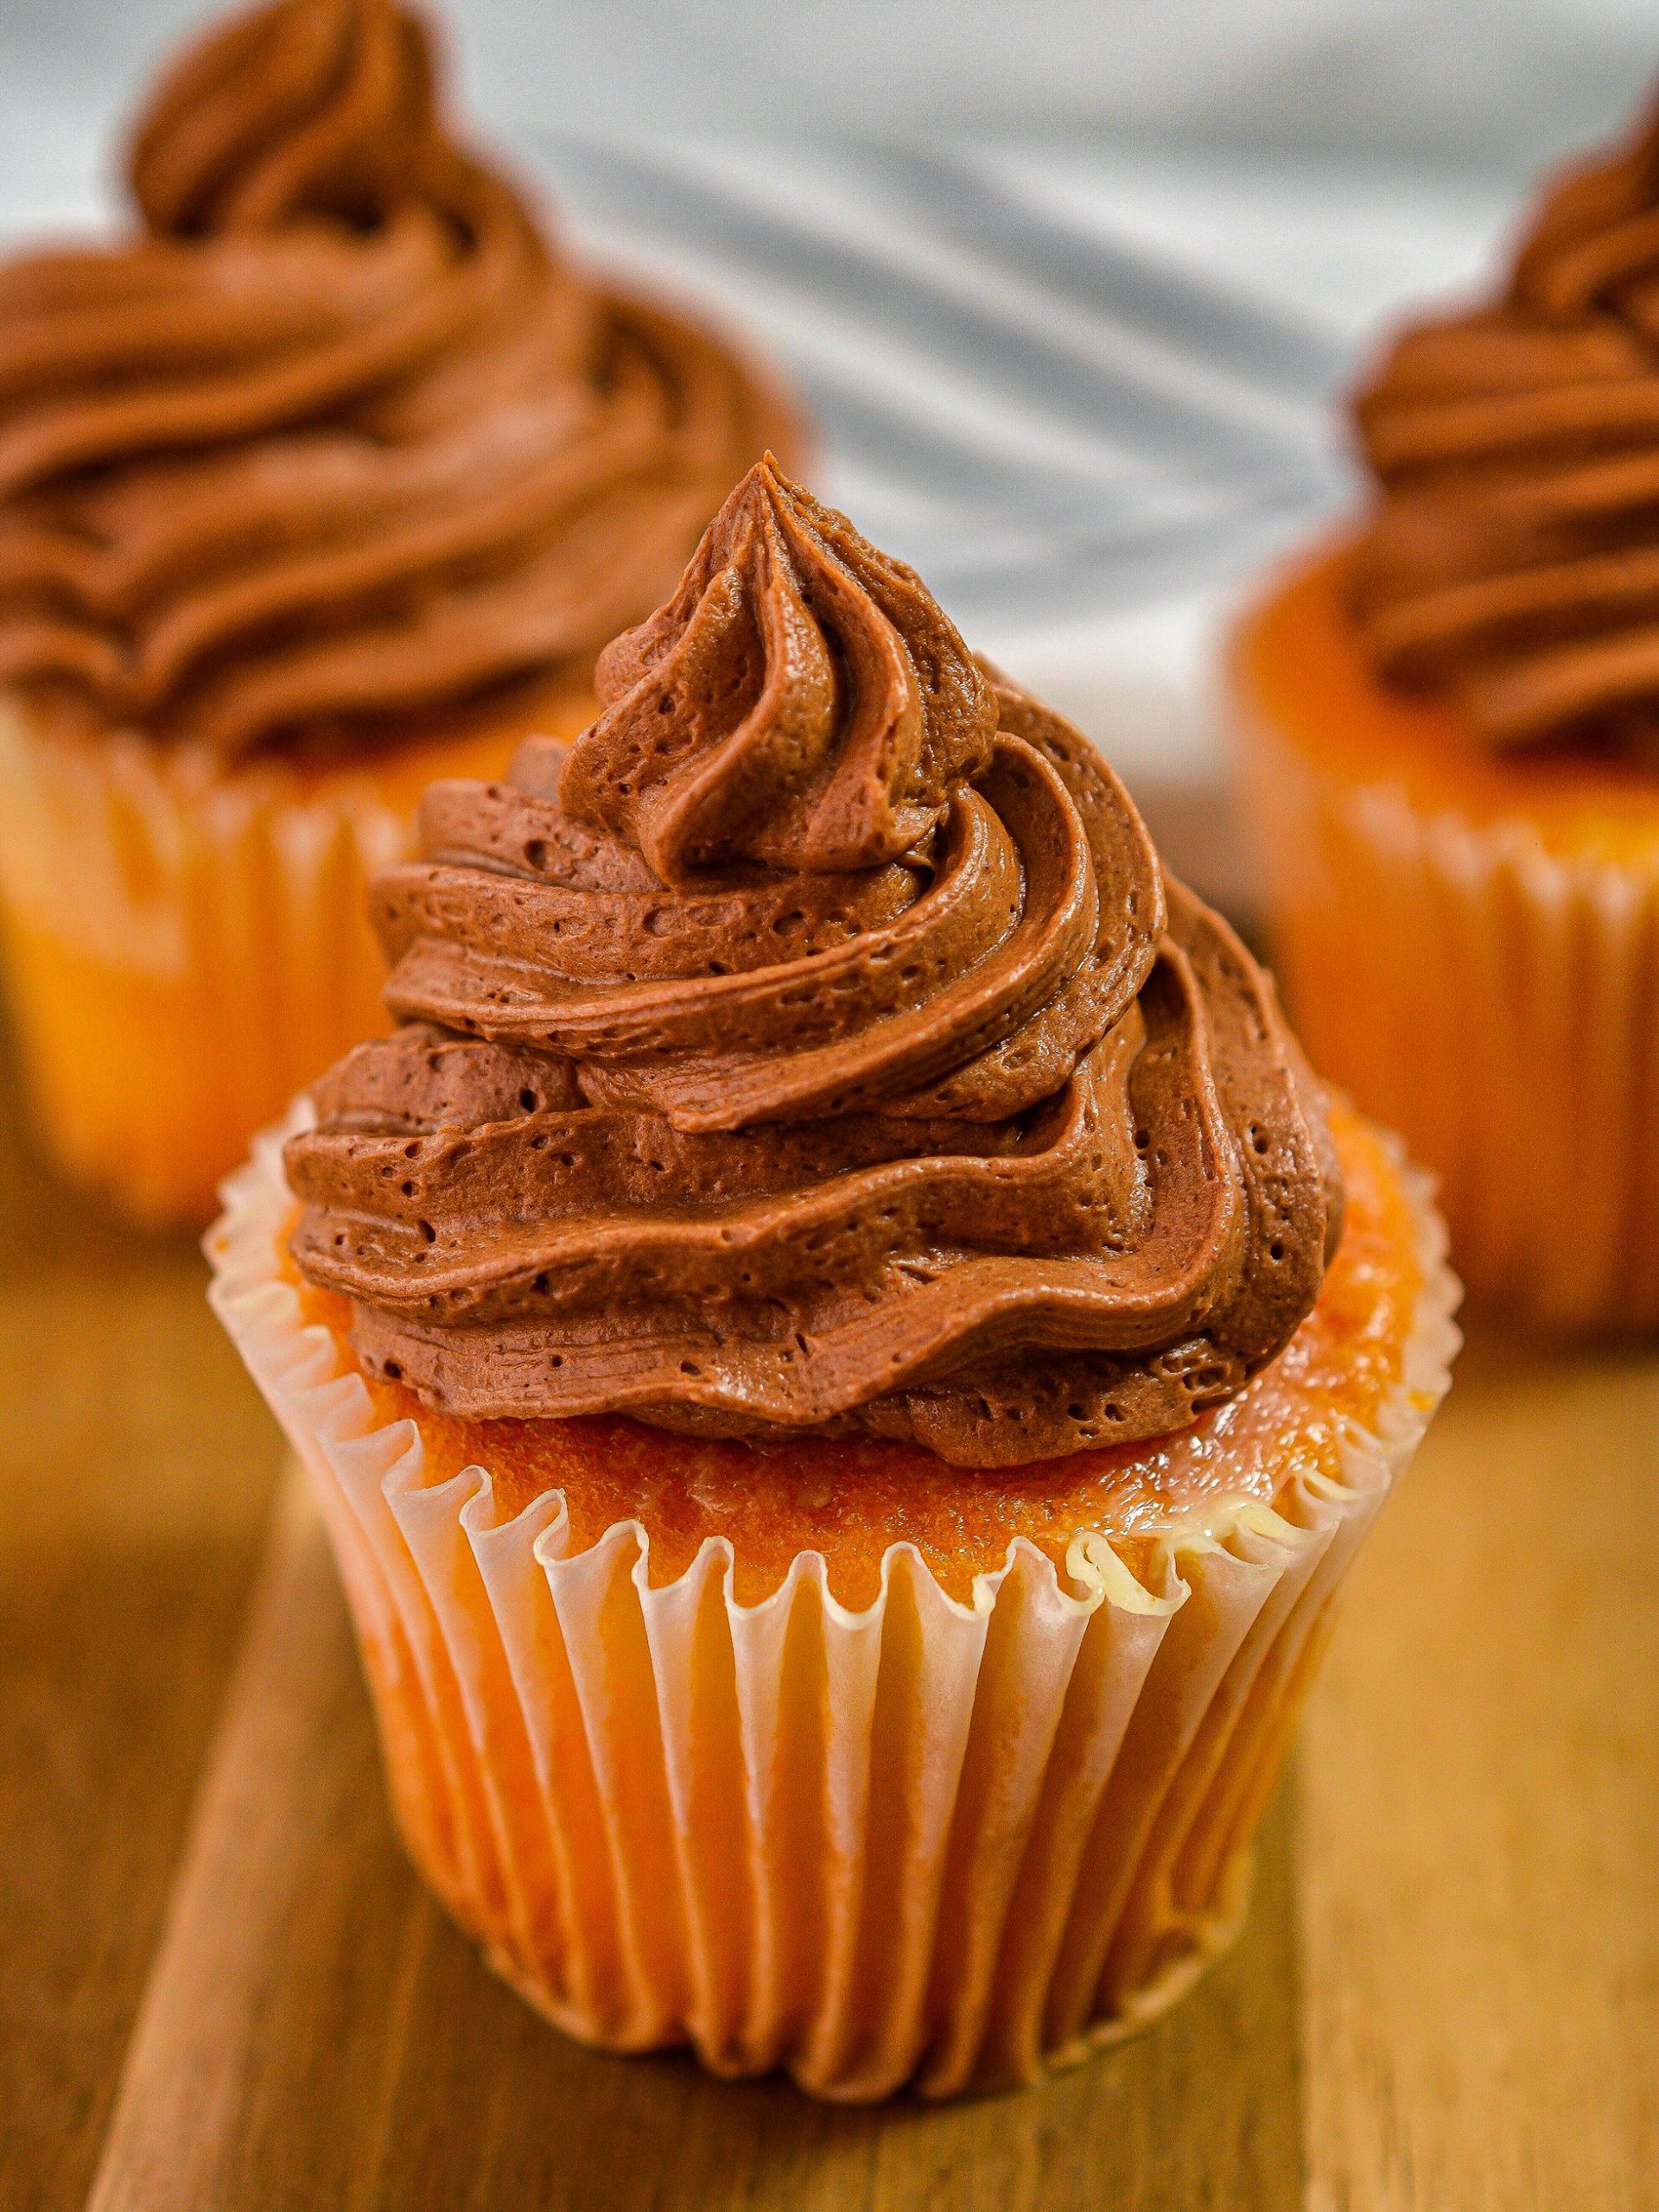 Use the icing immediately, or store in an airtight container in the fridge to use later. 